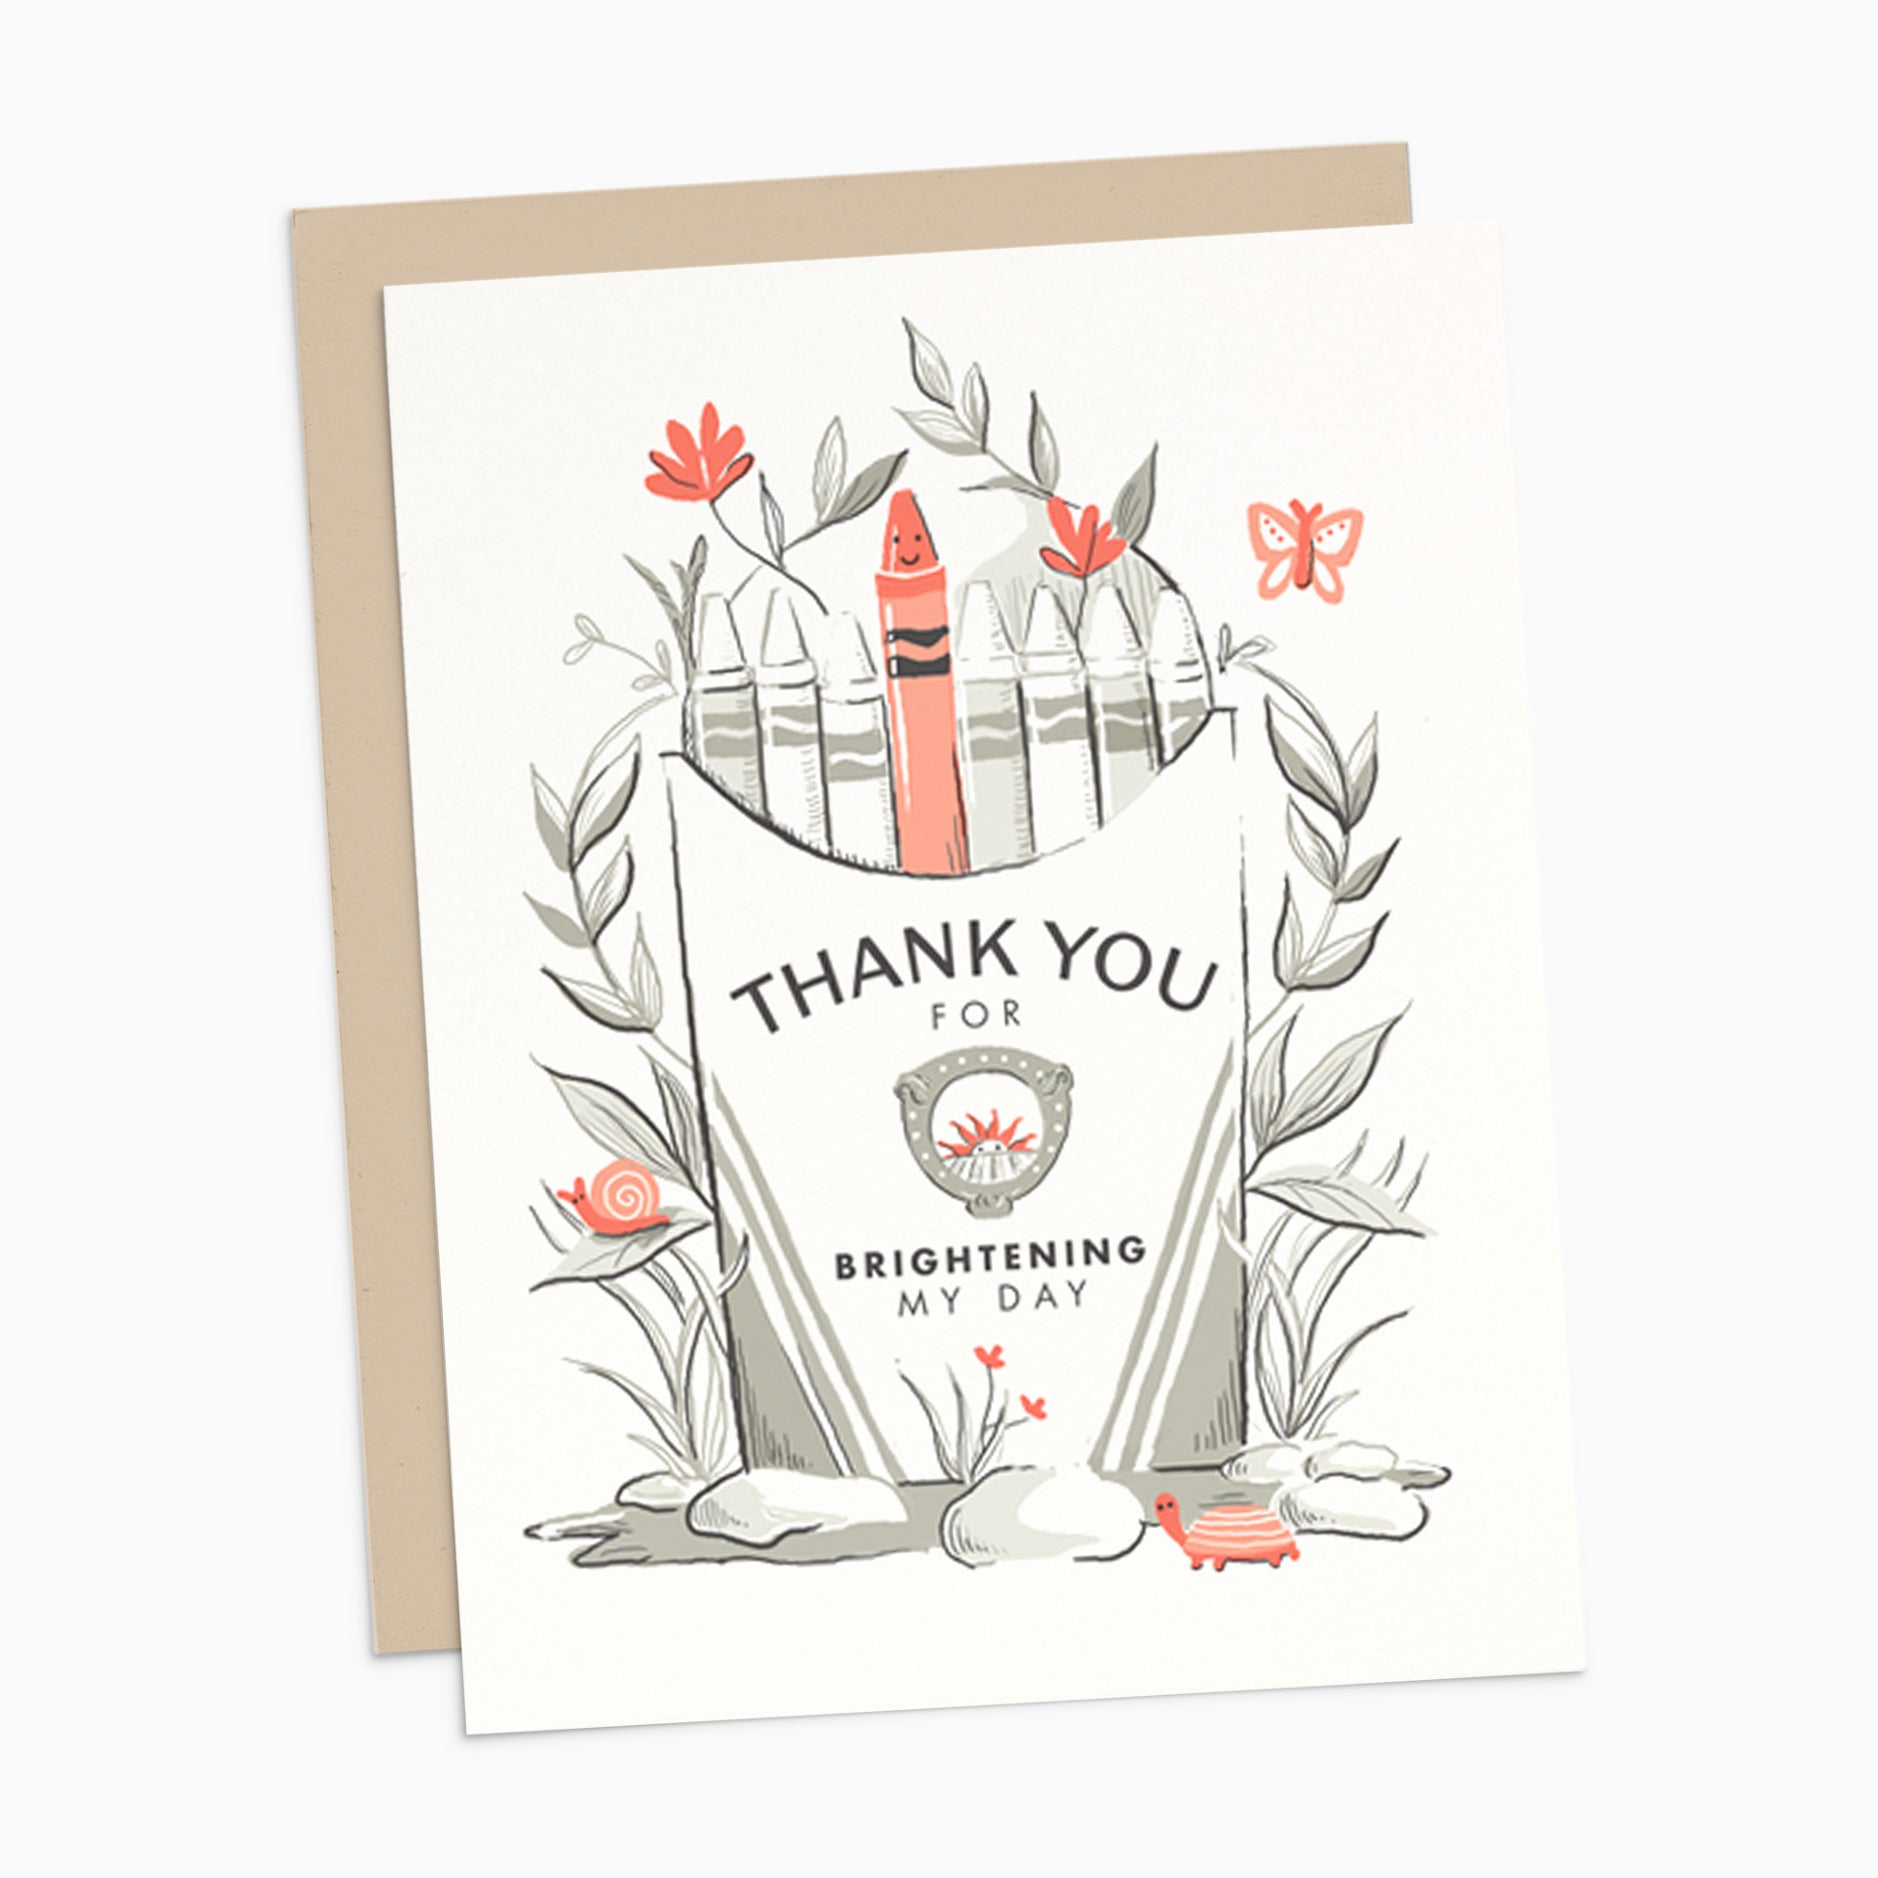 Illustrated Thank You Card featuring a box of crayons with one bright crayon and whimsical florals, displayed on a neutral background. Perfect for expressing heartfelt gratitude.